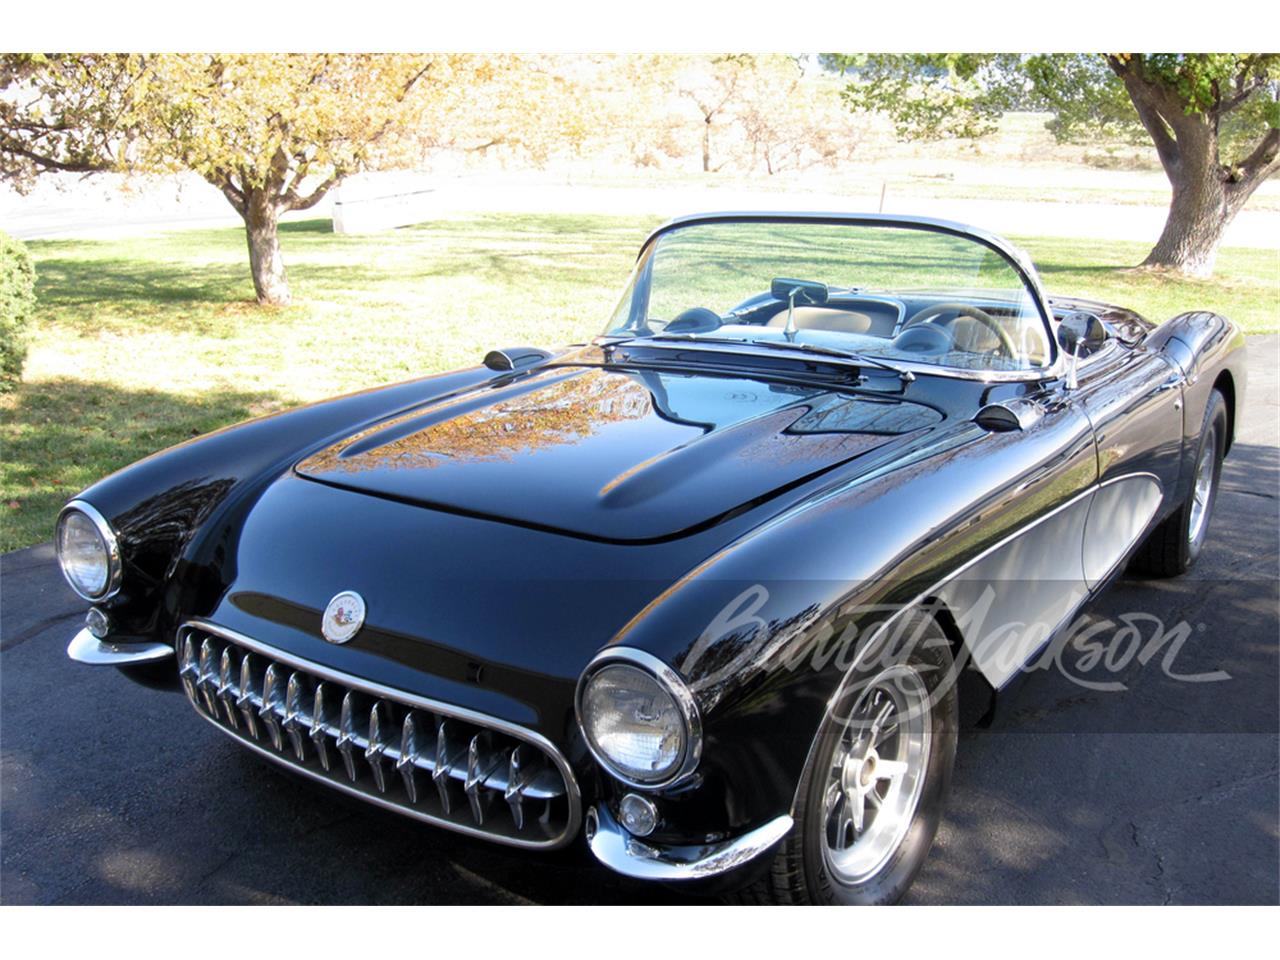 For Sale at Auction: 1957 Chevrolet Corvette in Scottsdale, Arizona for sale in Scottsdale, AZ